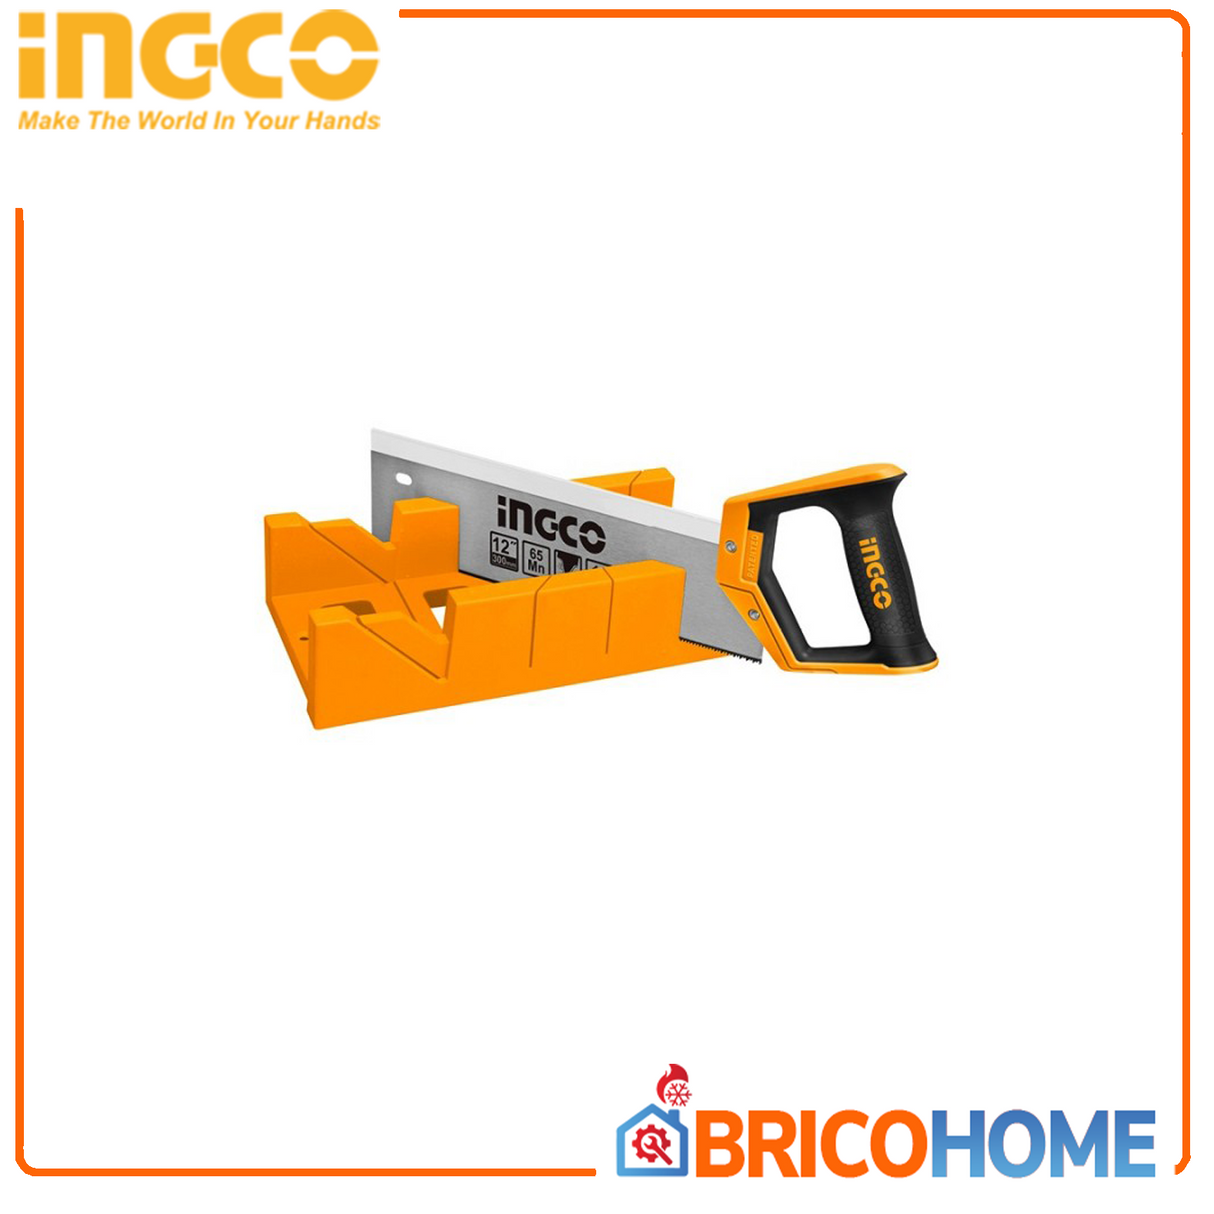 INGCO frame cutter with 300mm saw